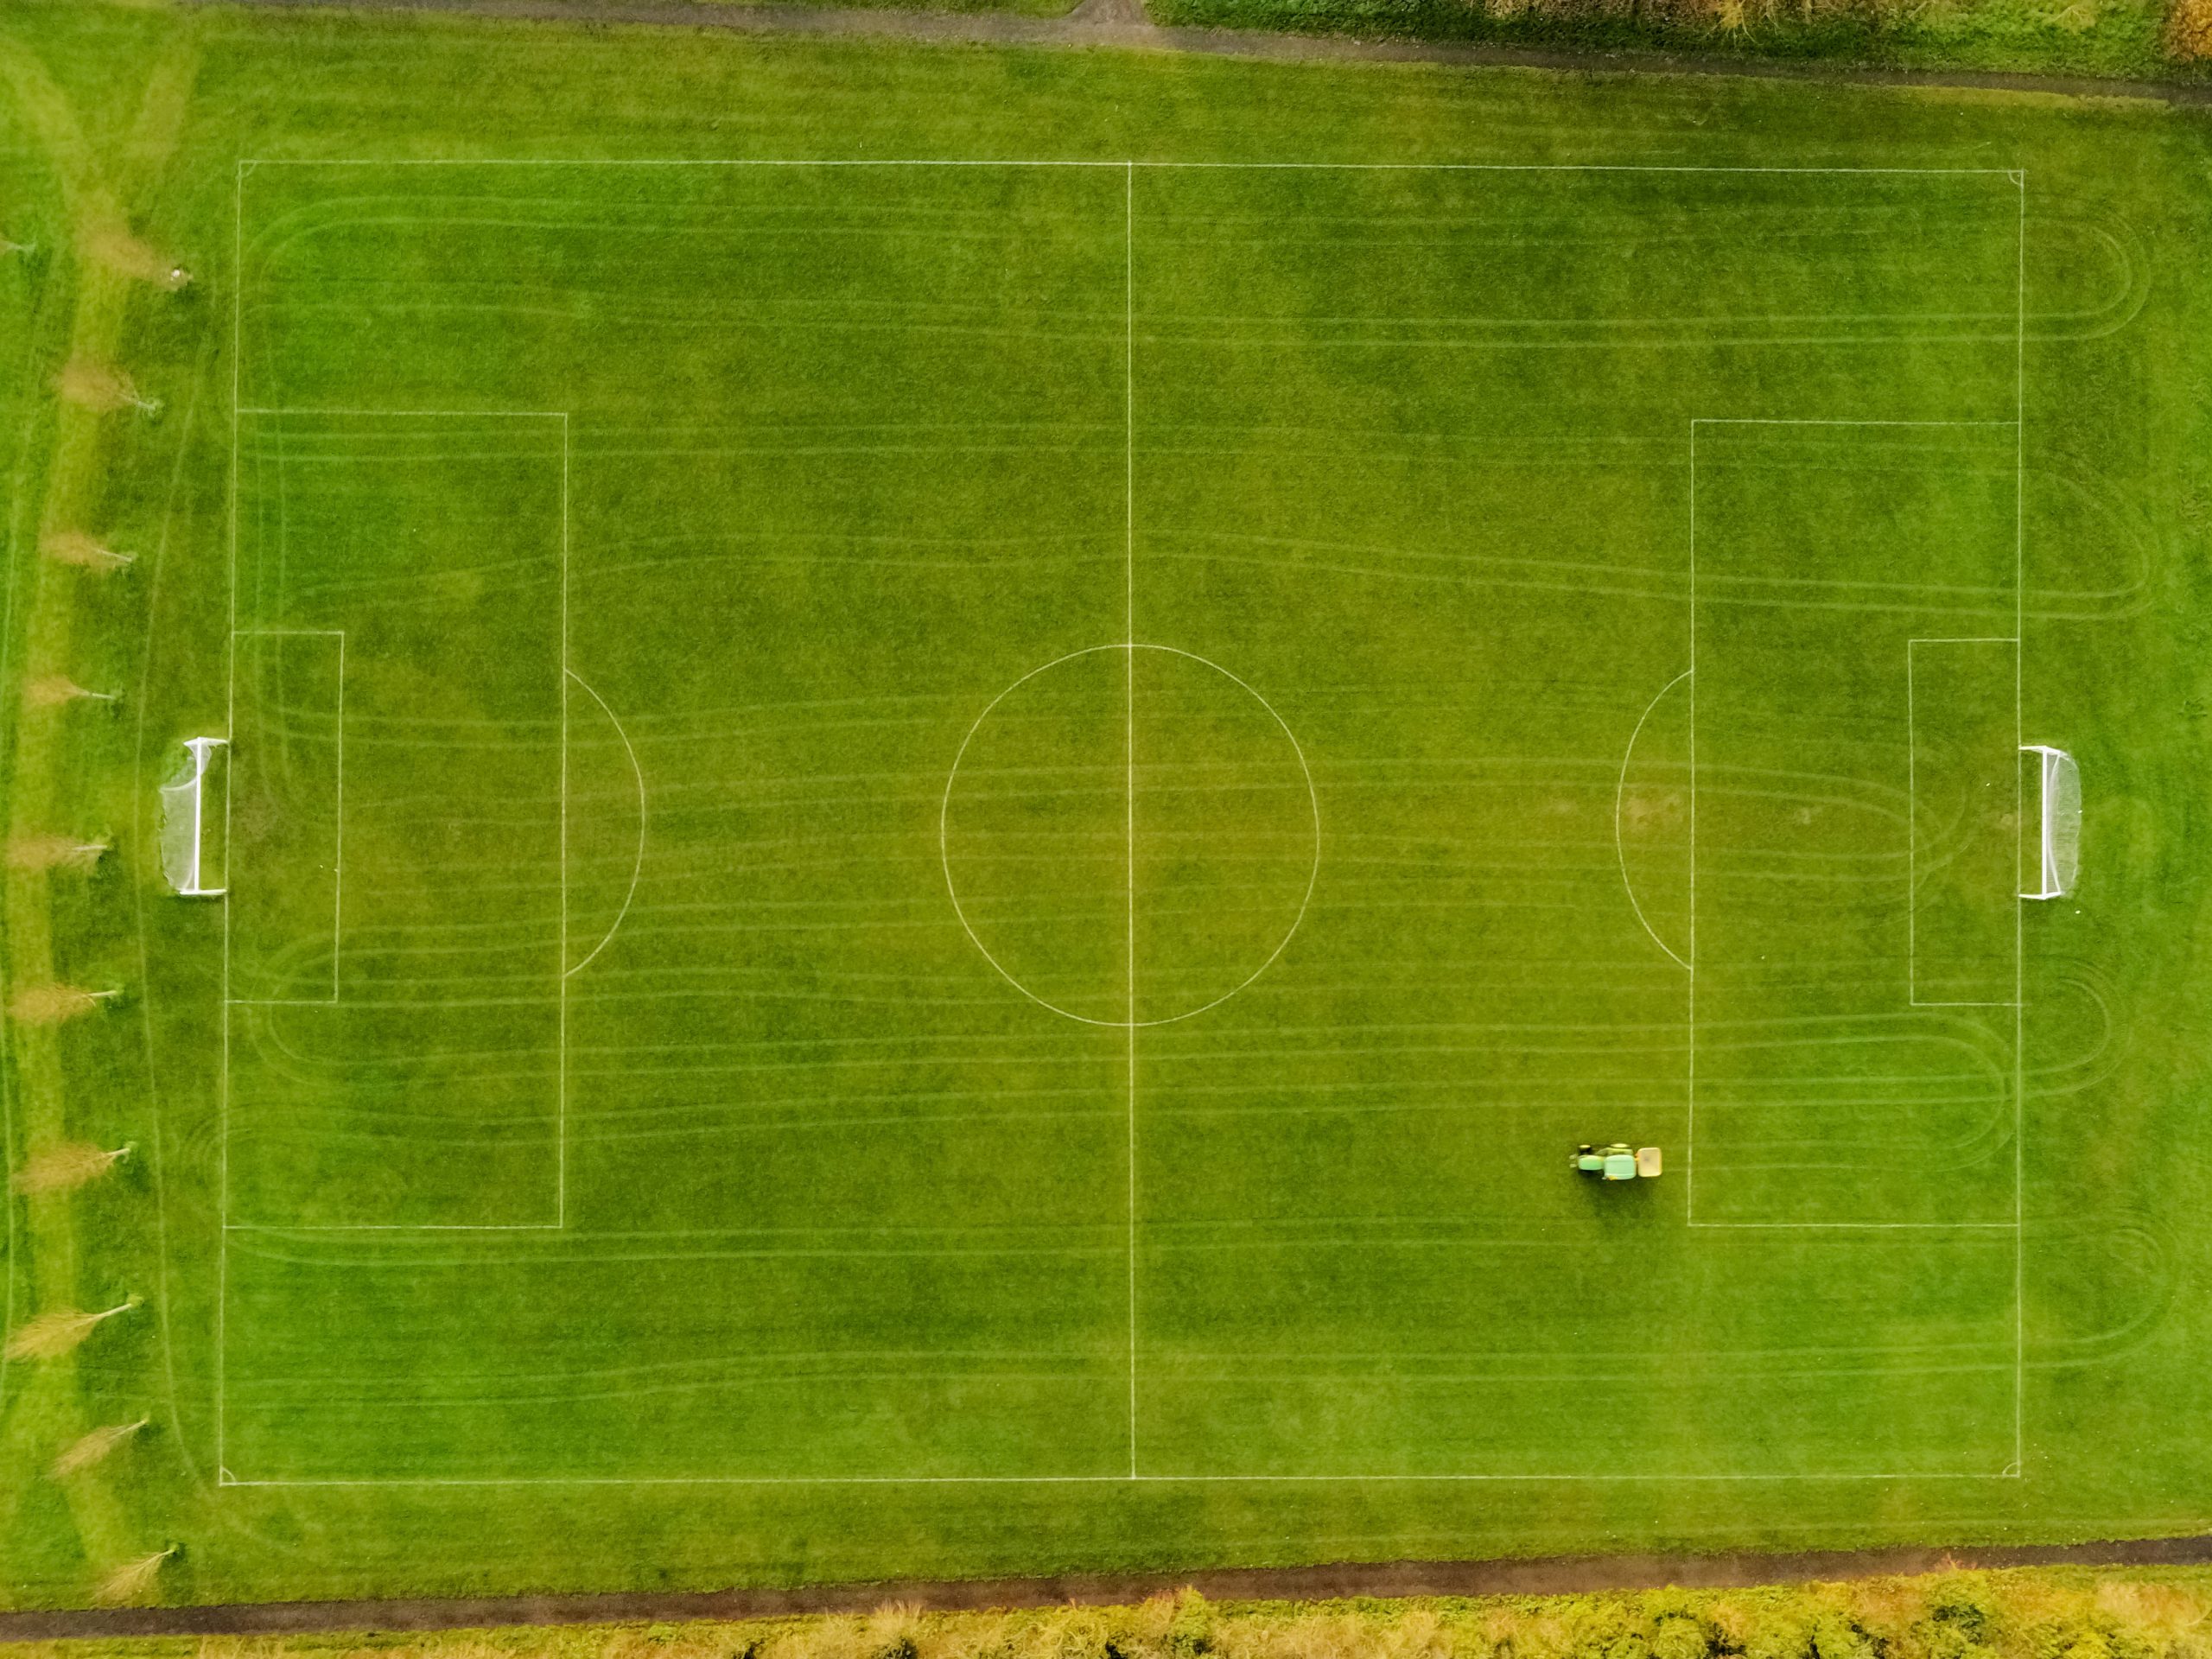 football field under maintenance, Tractor with trail all over the pitch